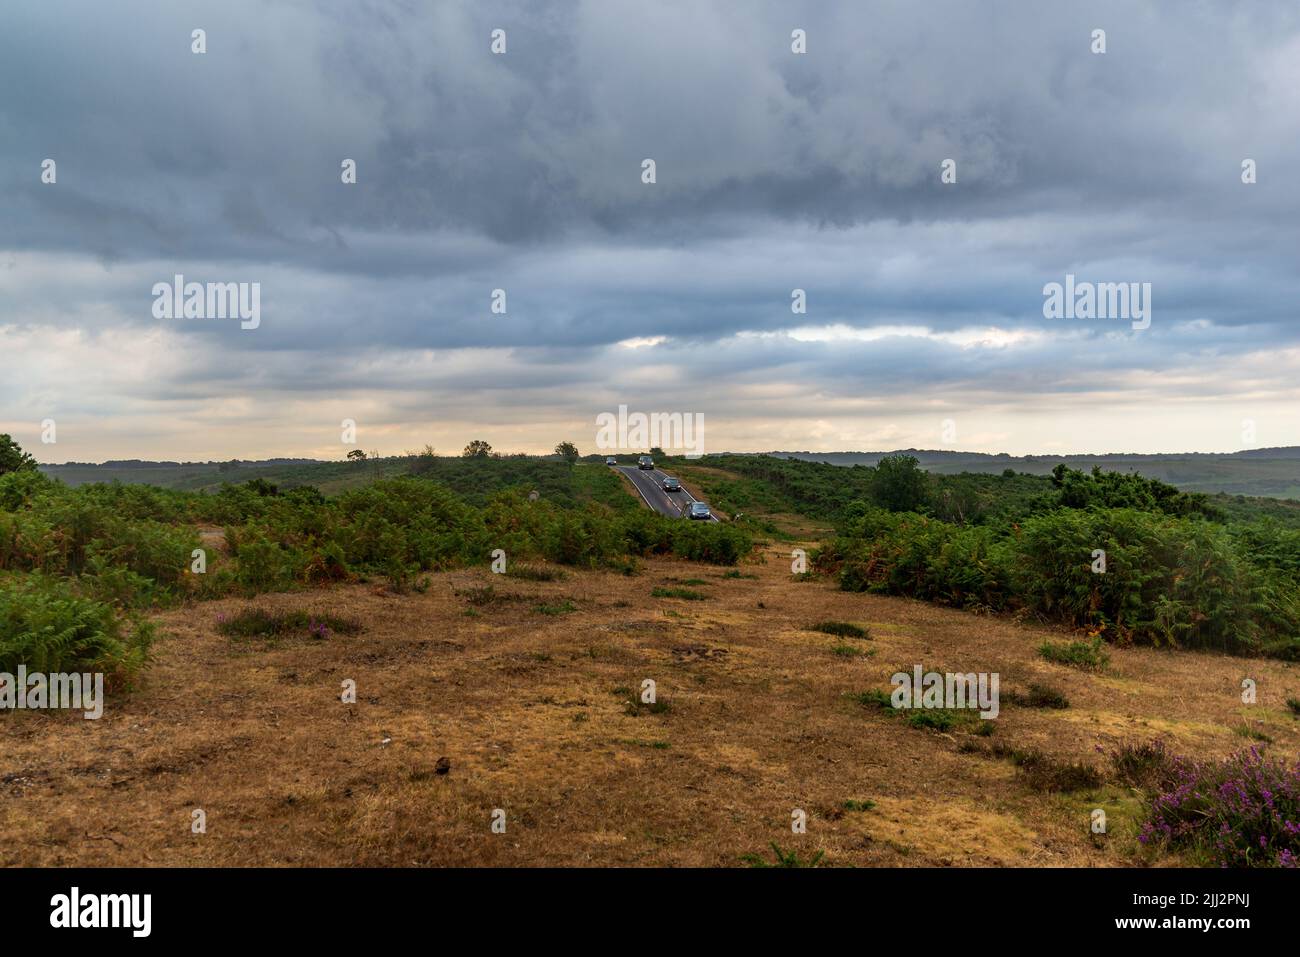 Godshill, New Forest, Hampshire, UK, 22nd July 2022, Weather: Rain at last following weeks of dry weather and missing out on recent showers. Tinder dry heathland gets a soaking in a heavy downpour late afternoon. Paul Biggins/Alamy Live News Stock Photo